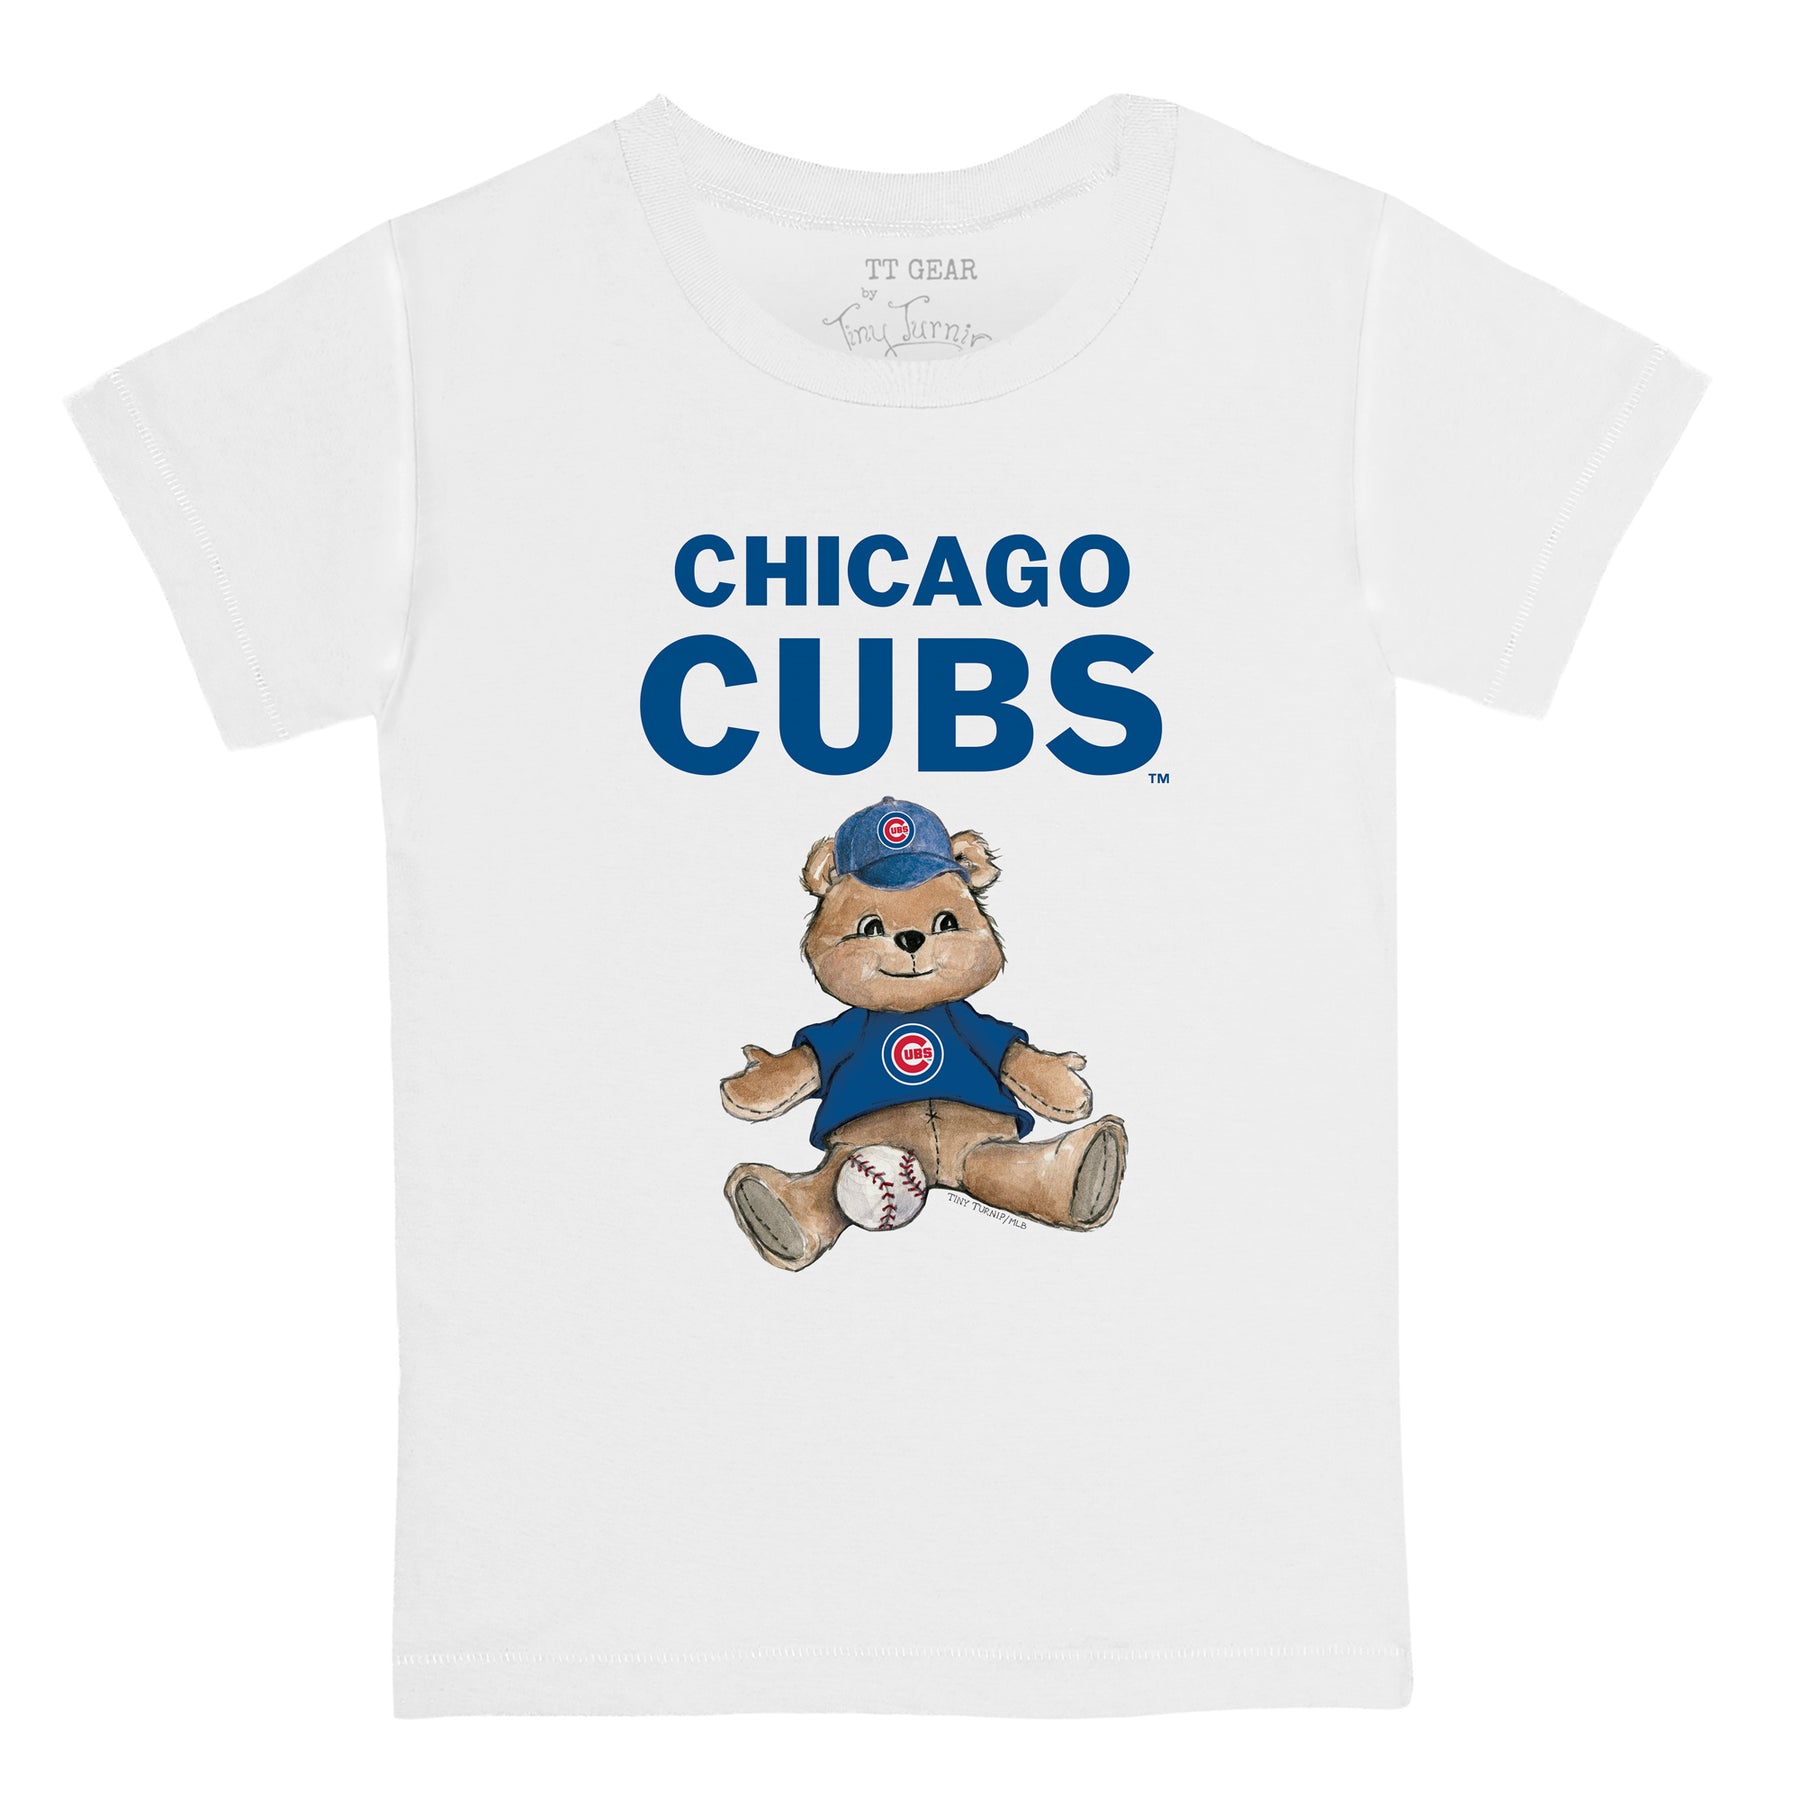 Toddler Red Chicago Cubs Ball Boy T-Shirt Size: 2T